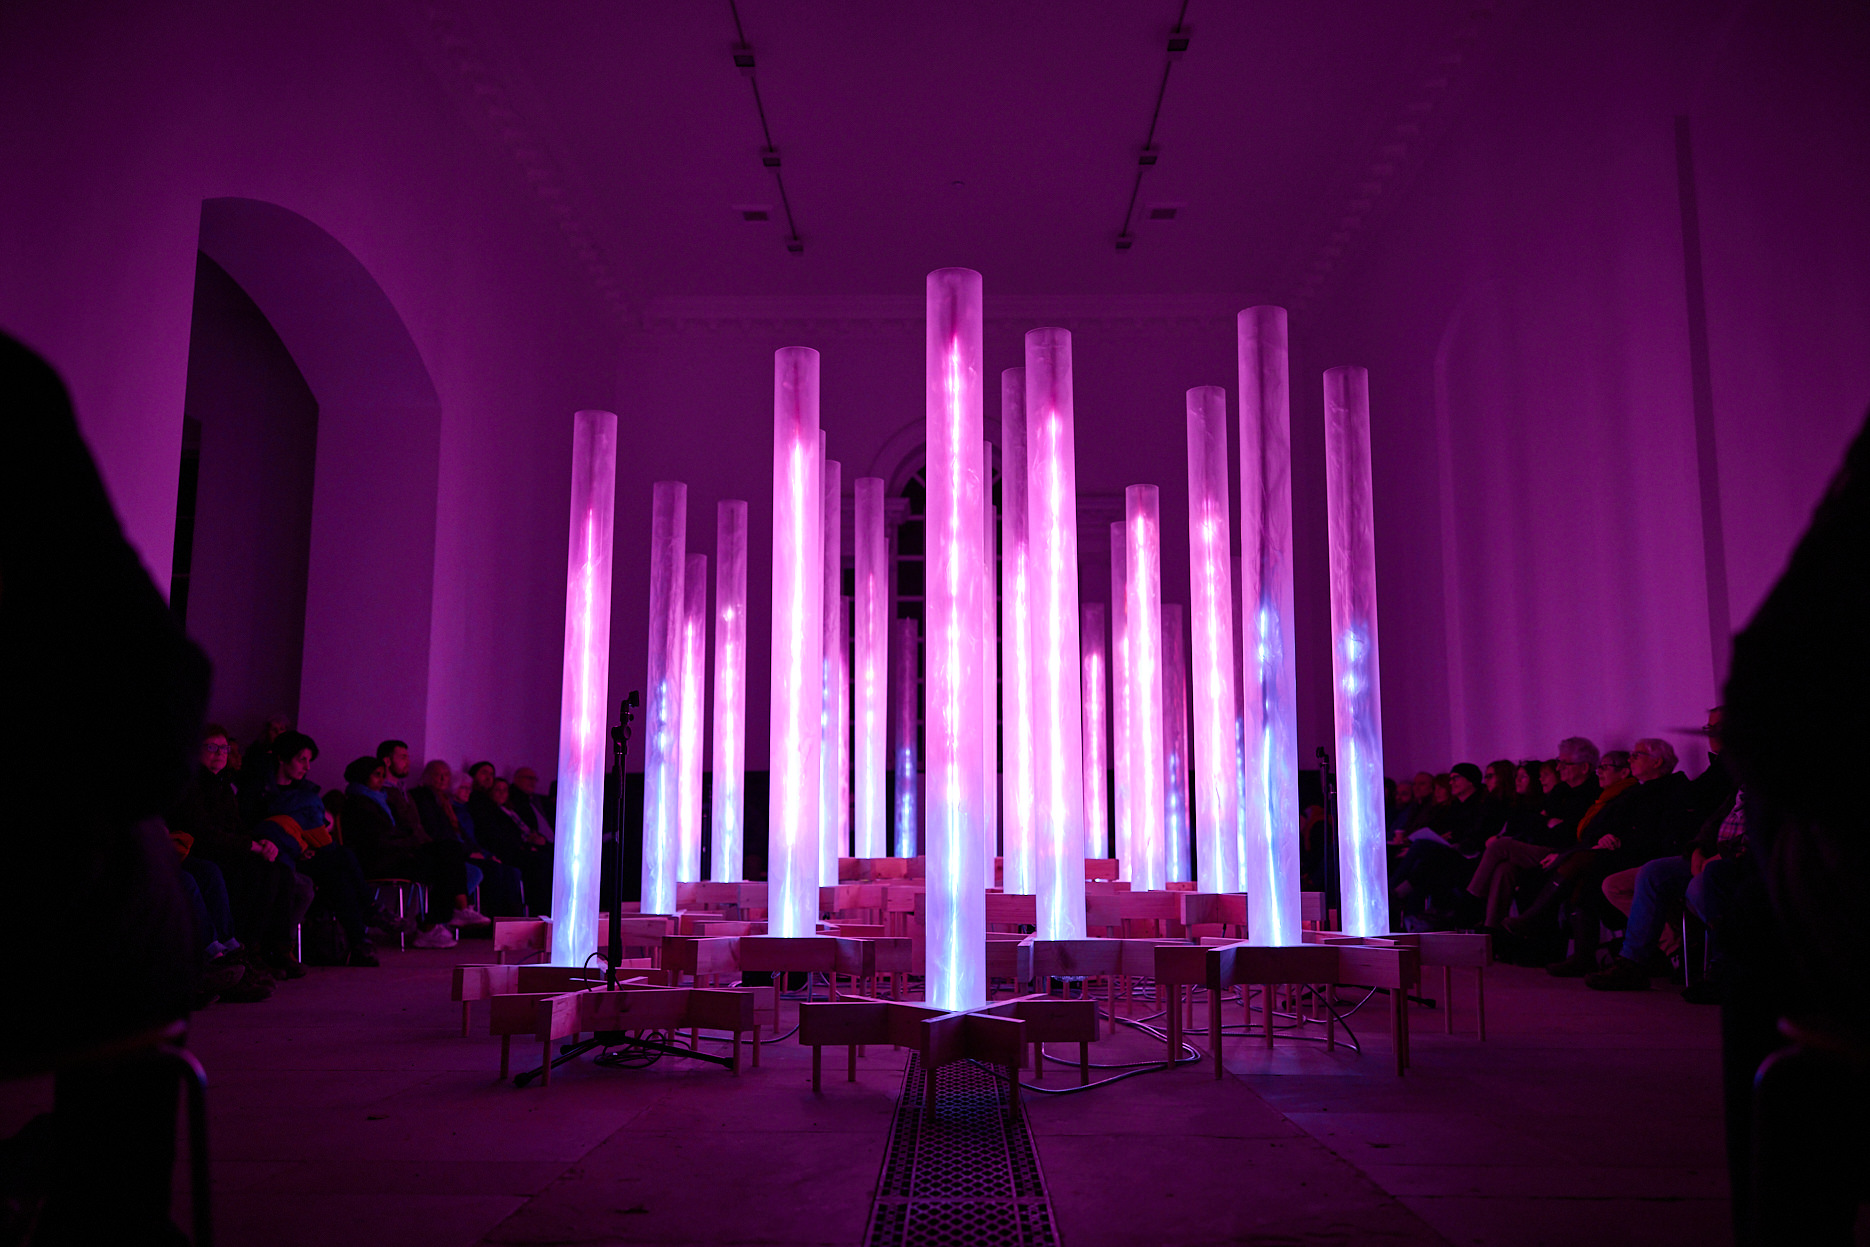 A collection of pink glowing columns